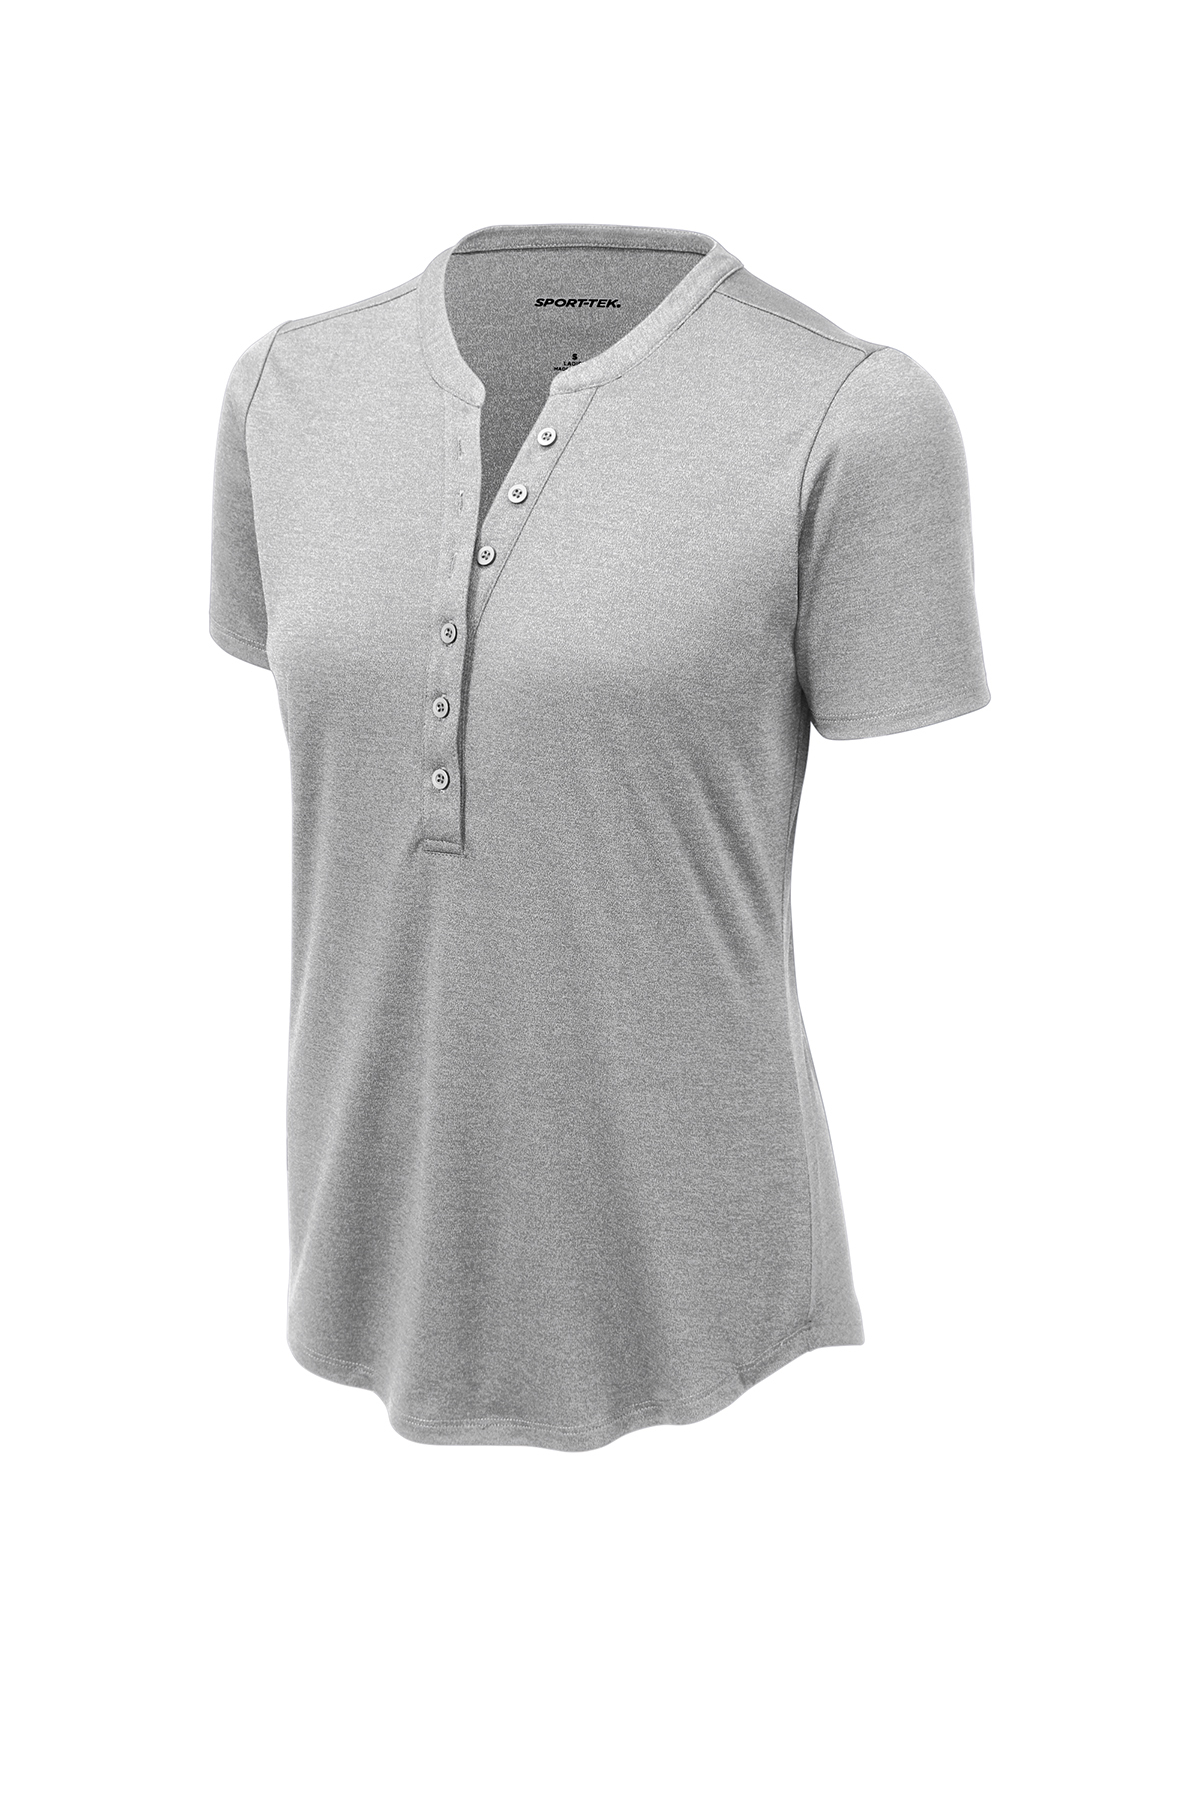 click to view Light Grey Heather